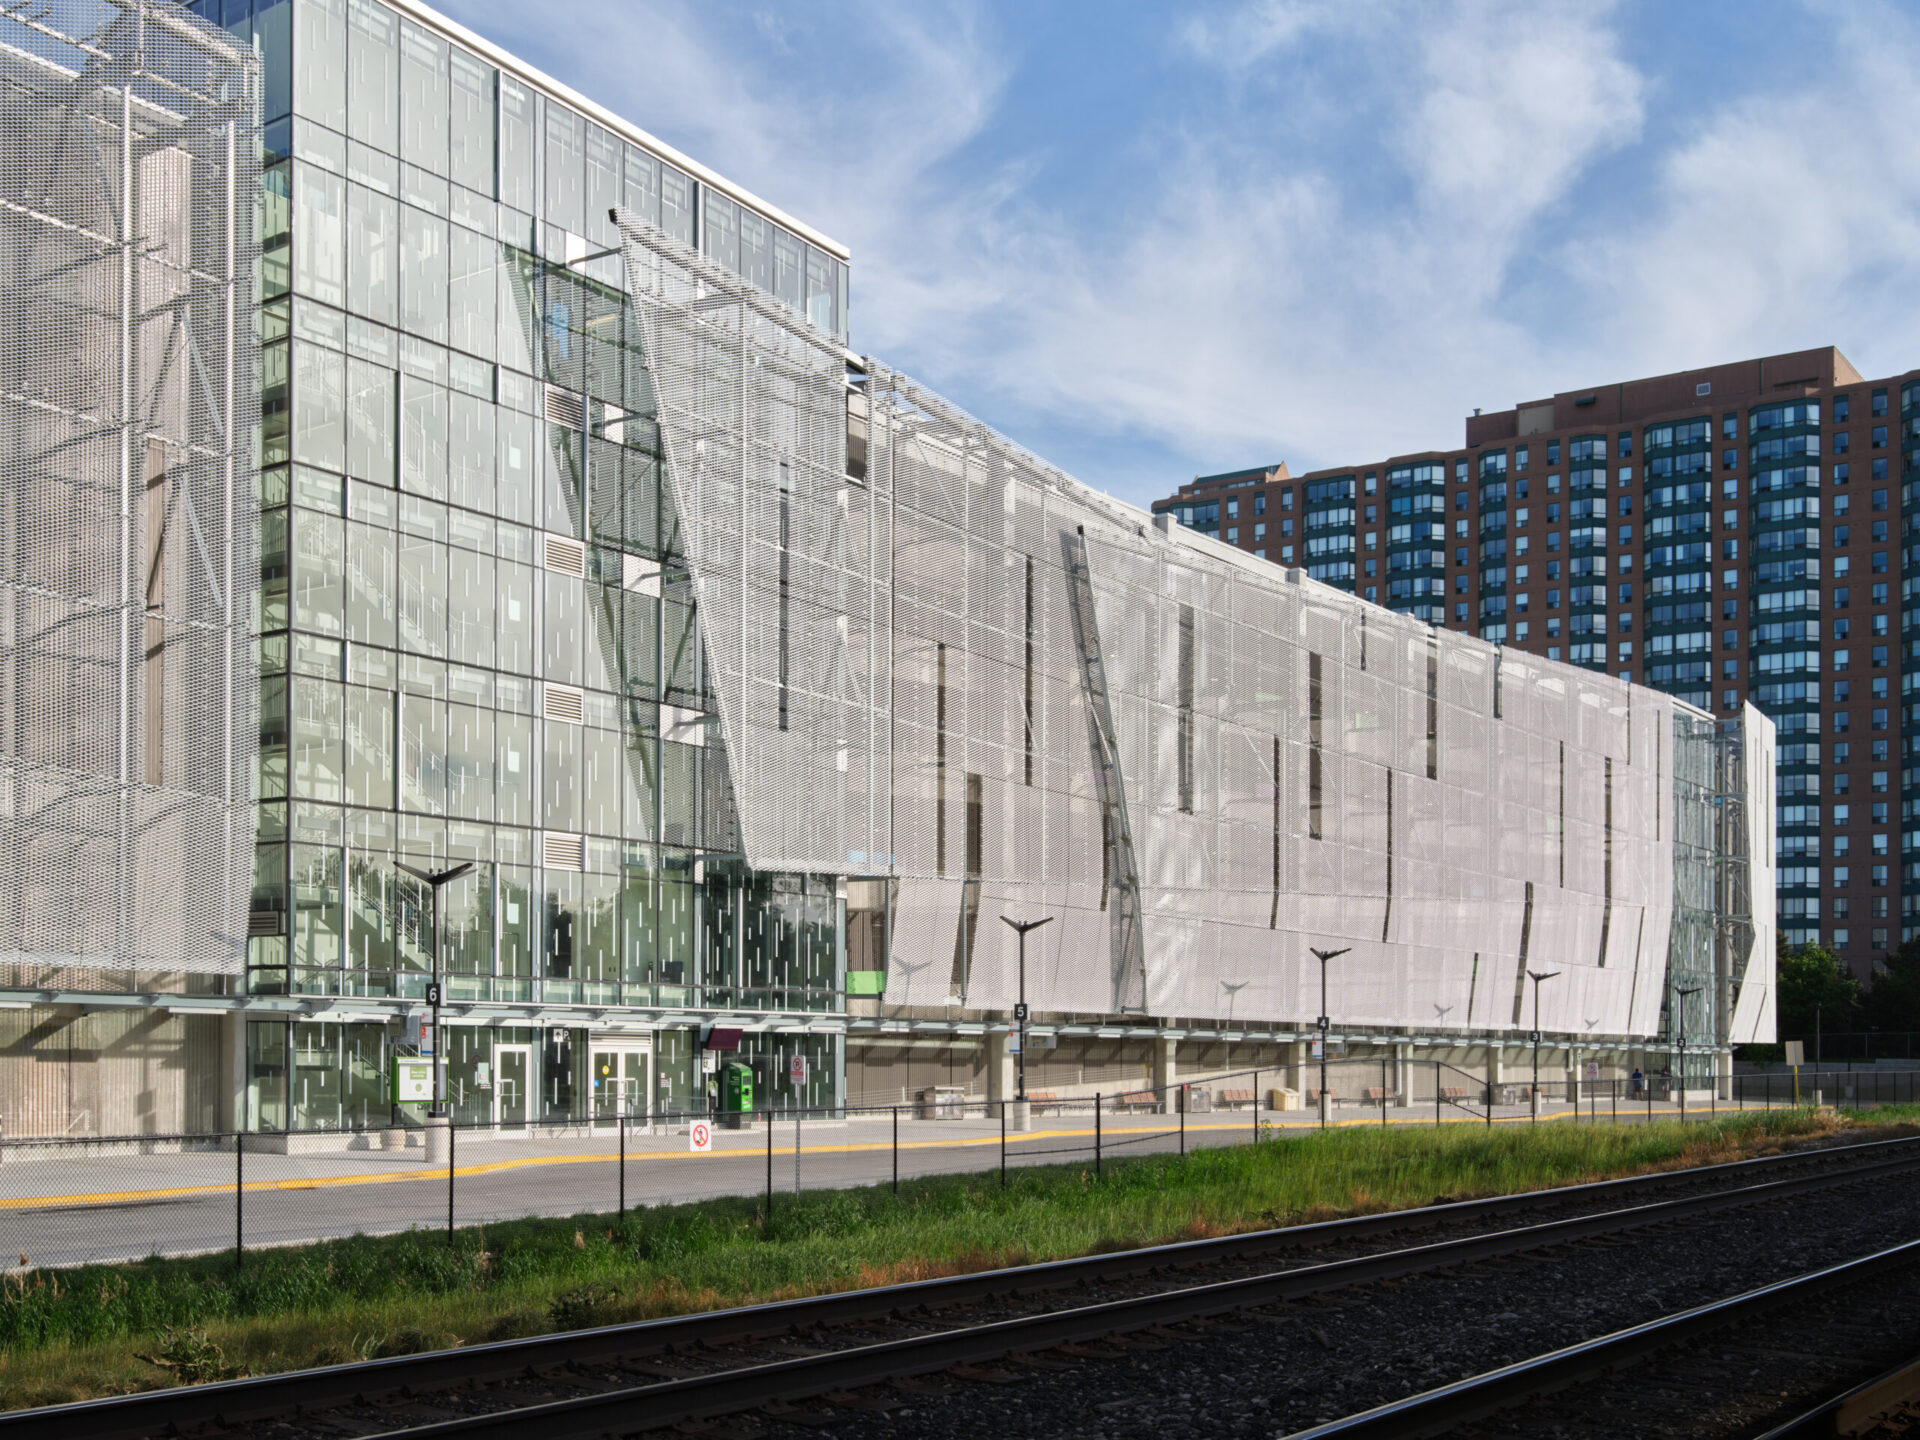 An architecturally impressive glass building featuring a train track.